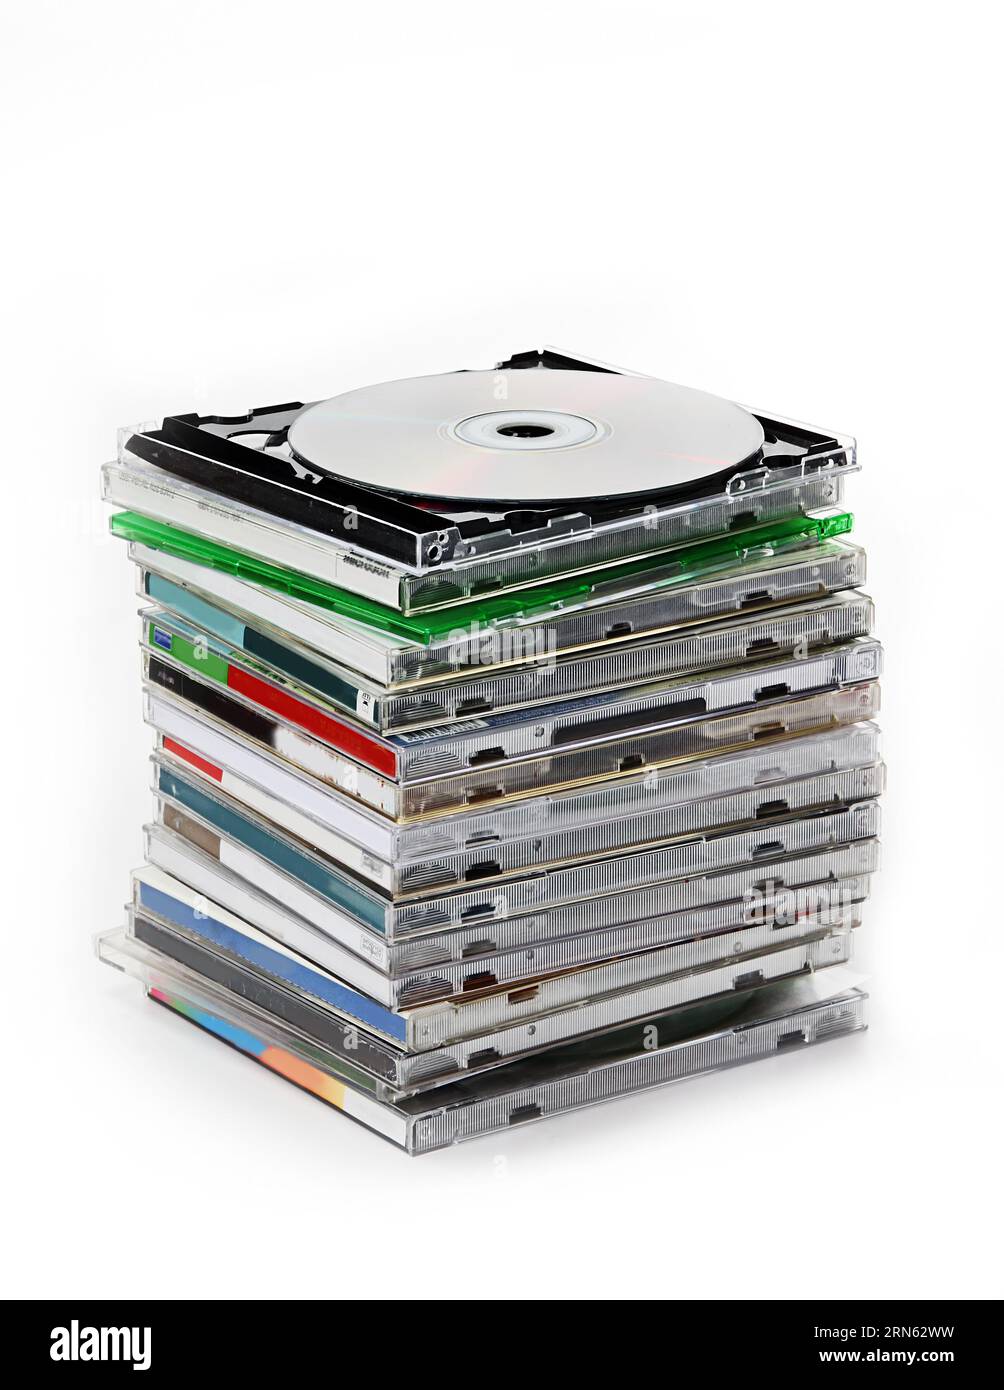 The stack of CD cases Stock Photo